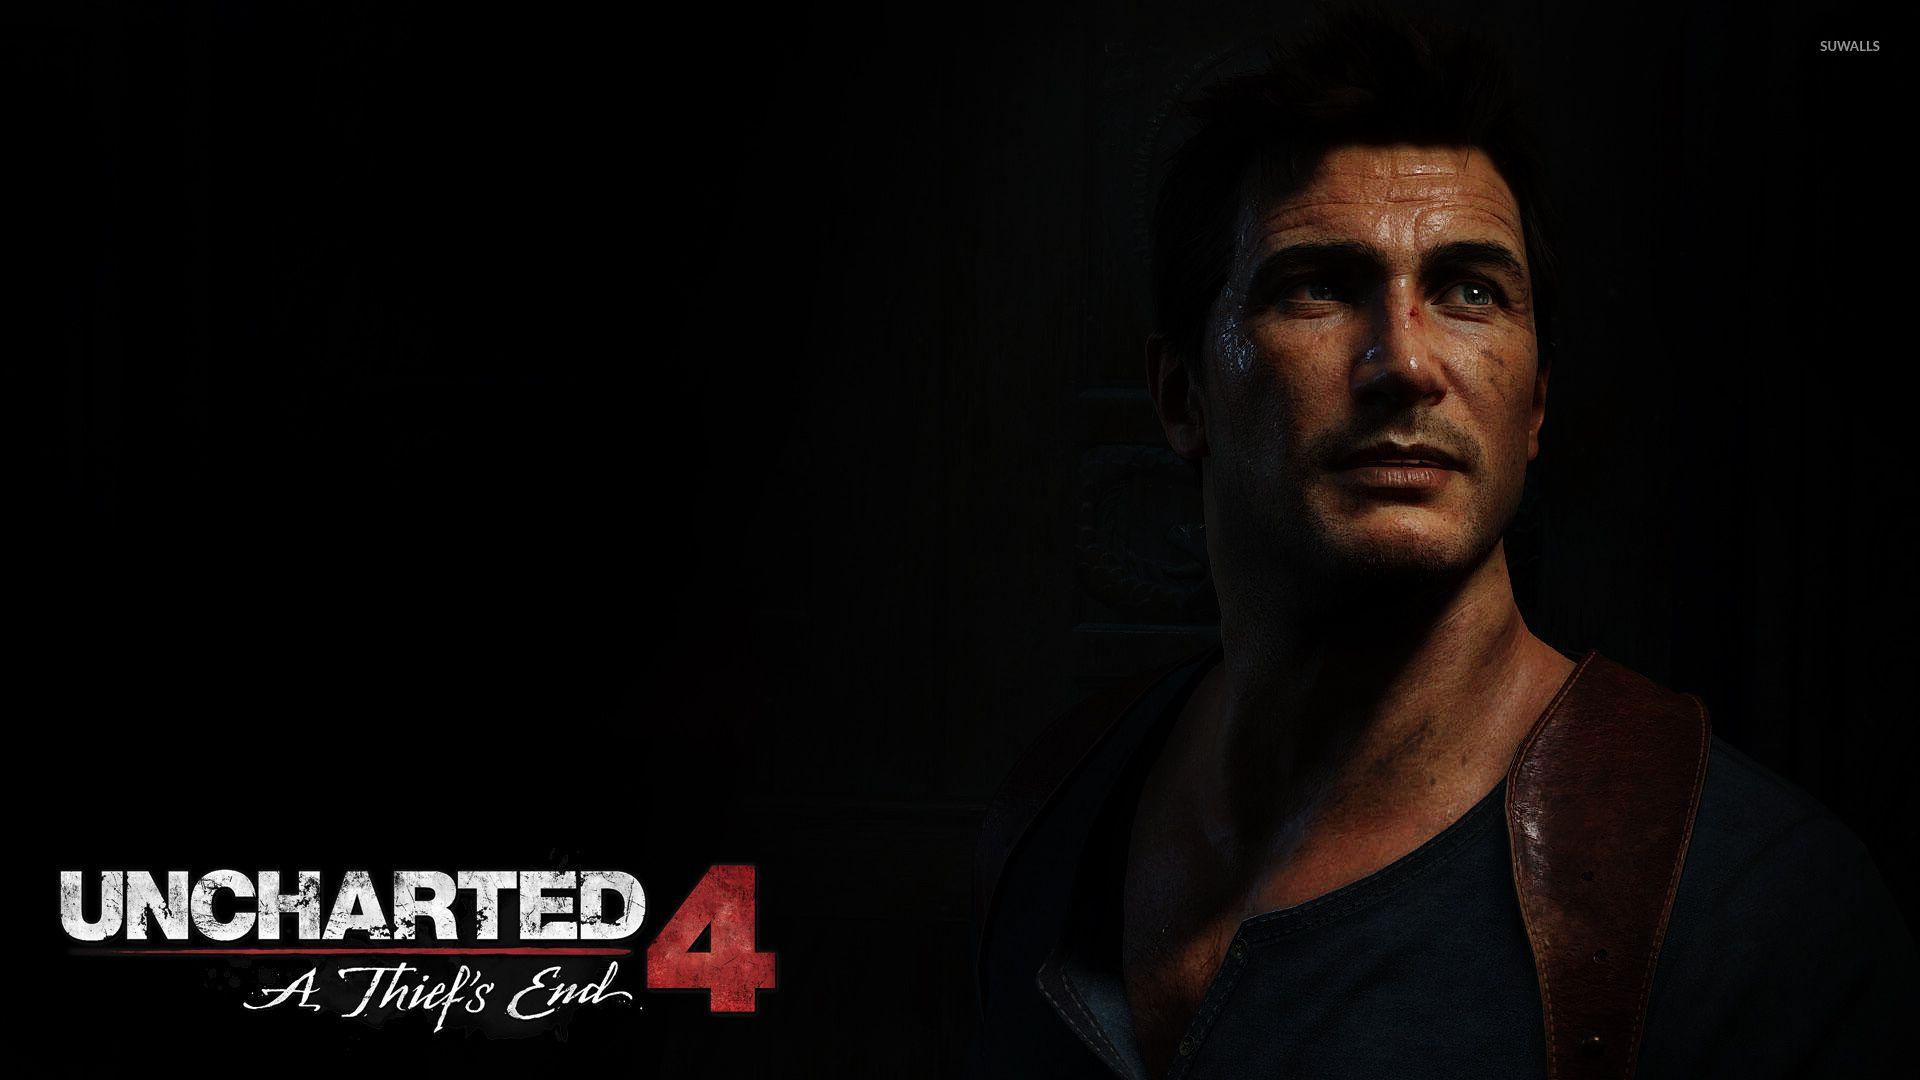 Nathan Drake in Uncharted 4: A Thief's End wallpaper